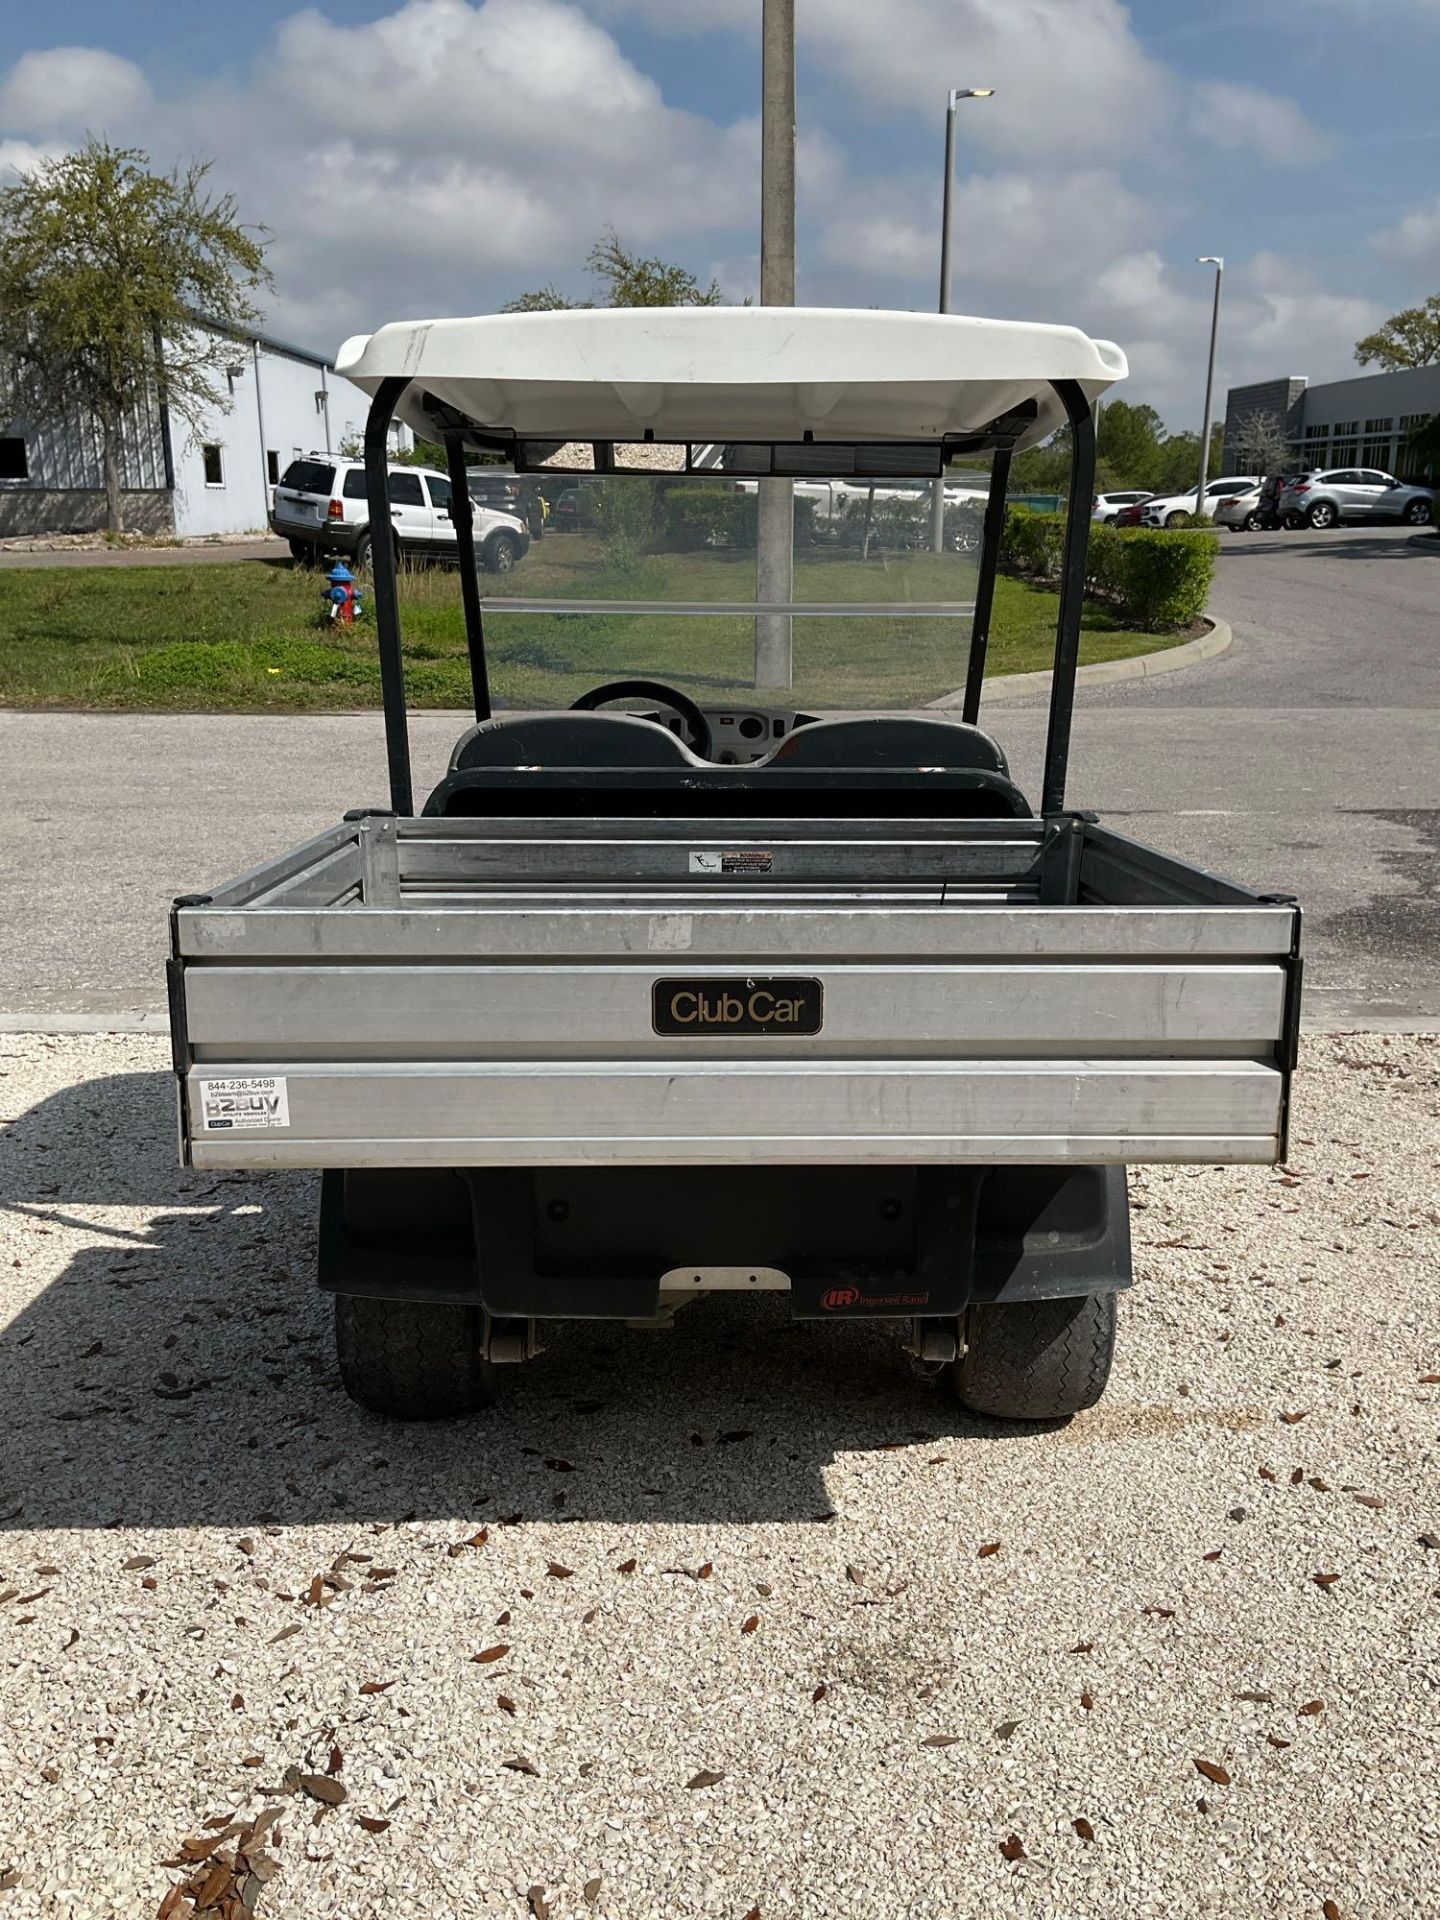 2018 CLUB CAR CARRYALL 300 ATV MODEL CA300 , ELECTRIC , MANUEL DUMP BED, BATTERY CHARGER INCLUDED... - Image 4 of 13